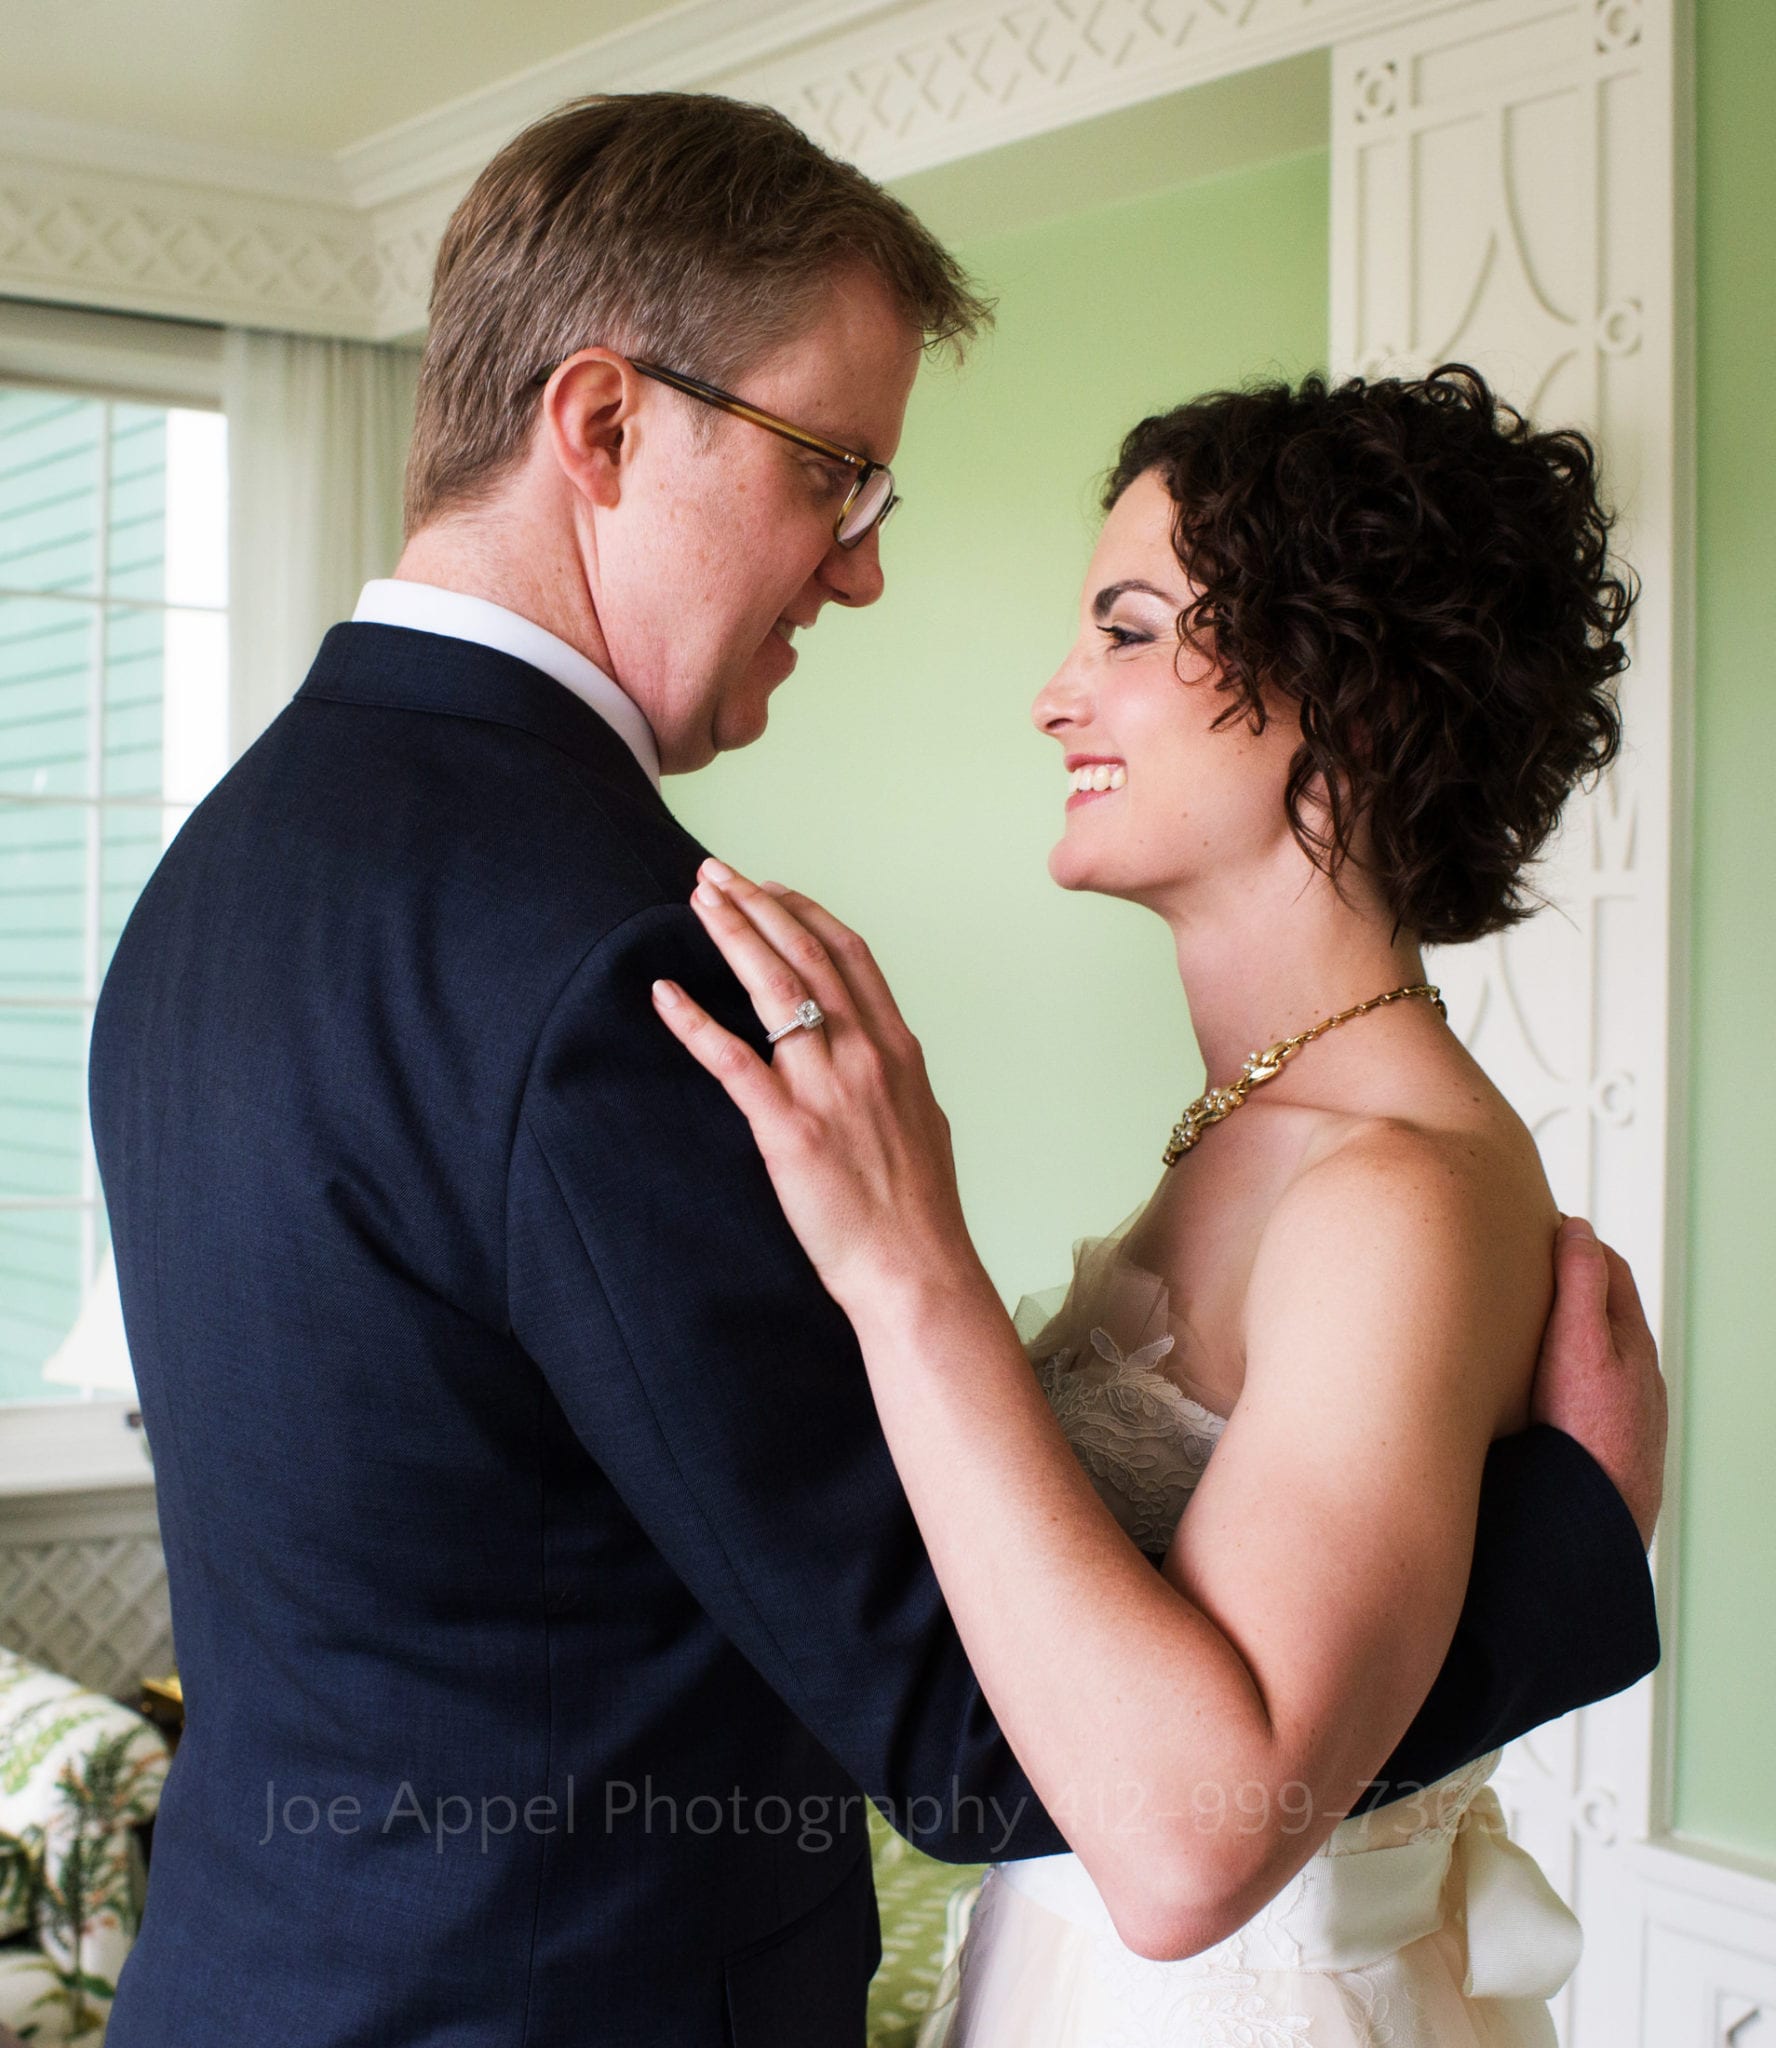 a bride and groom embrace in a green room and smile at each other